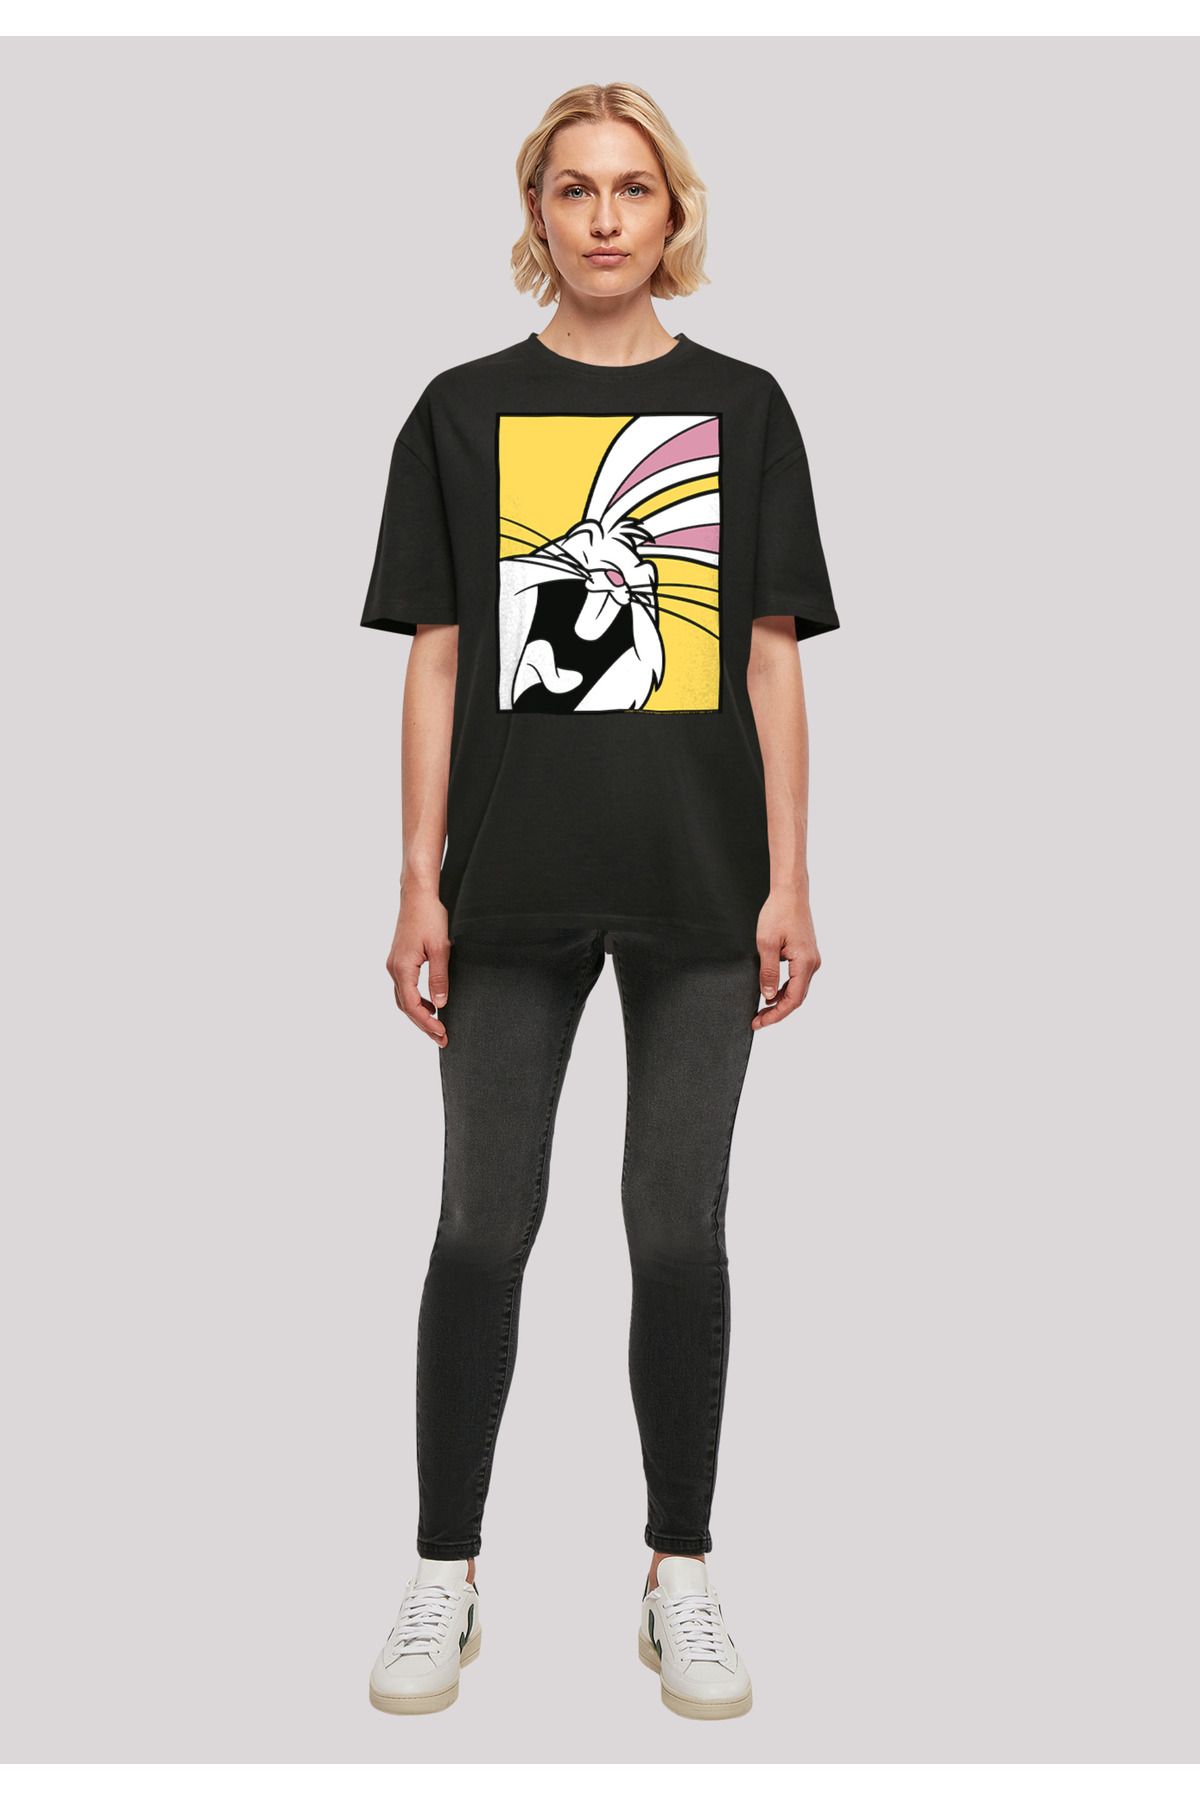 Trendyol Oversized Boyfriend with Tunes Laughing Bugs Looney - T-Shirt Damen Bunny Ladies F4NT4STIC